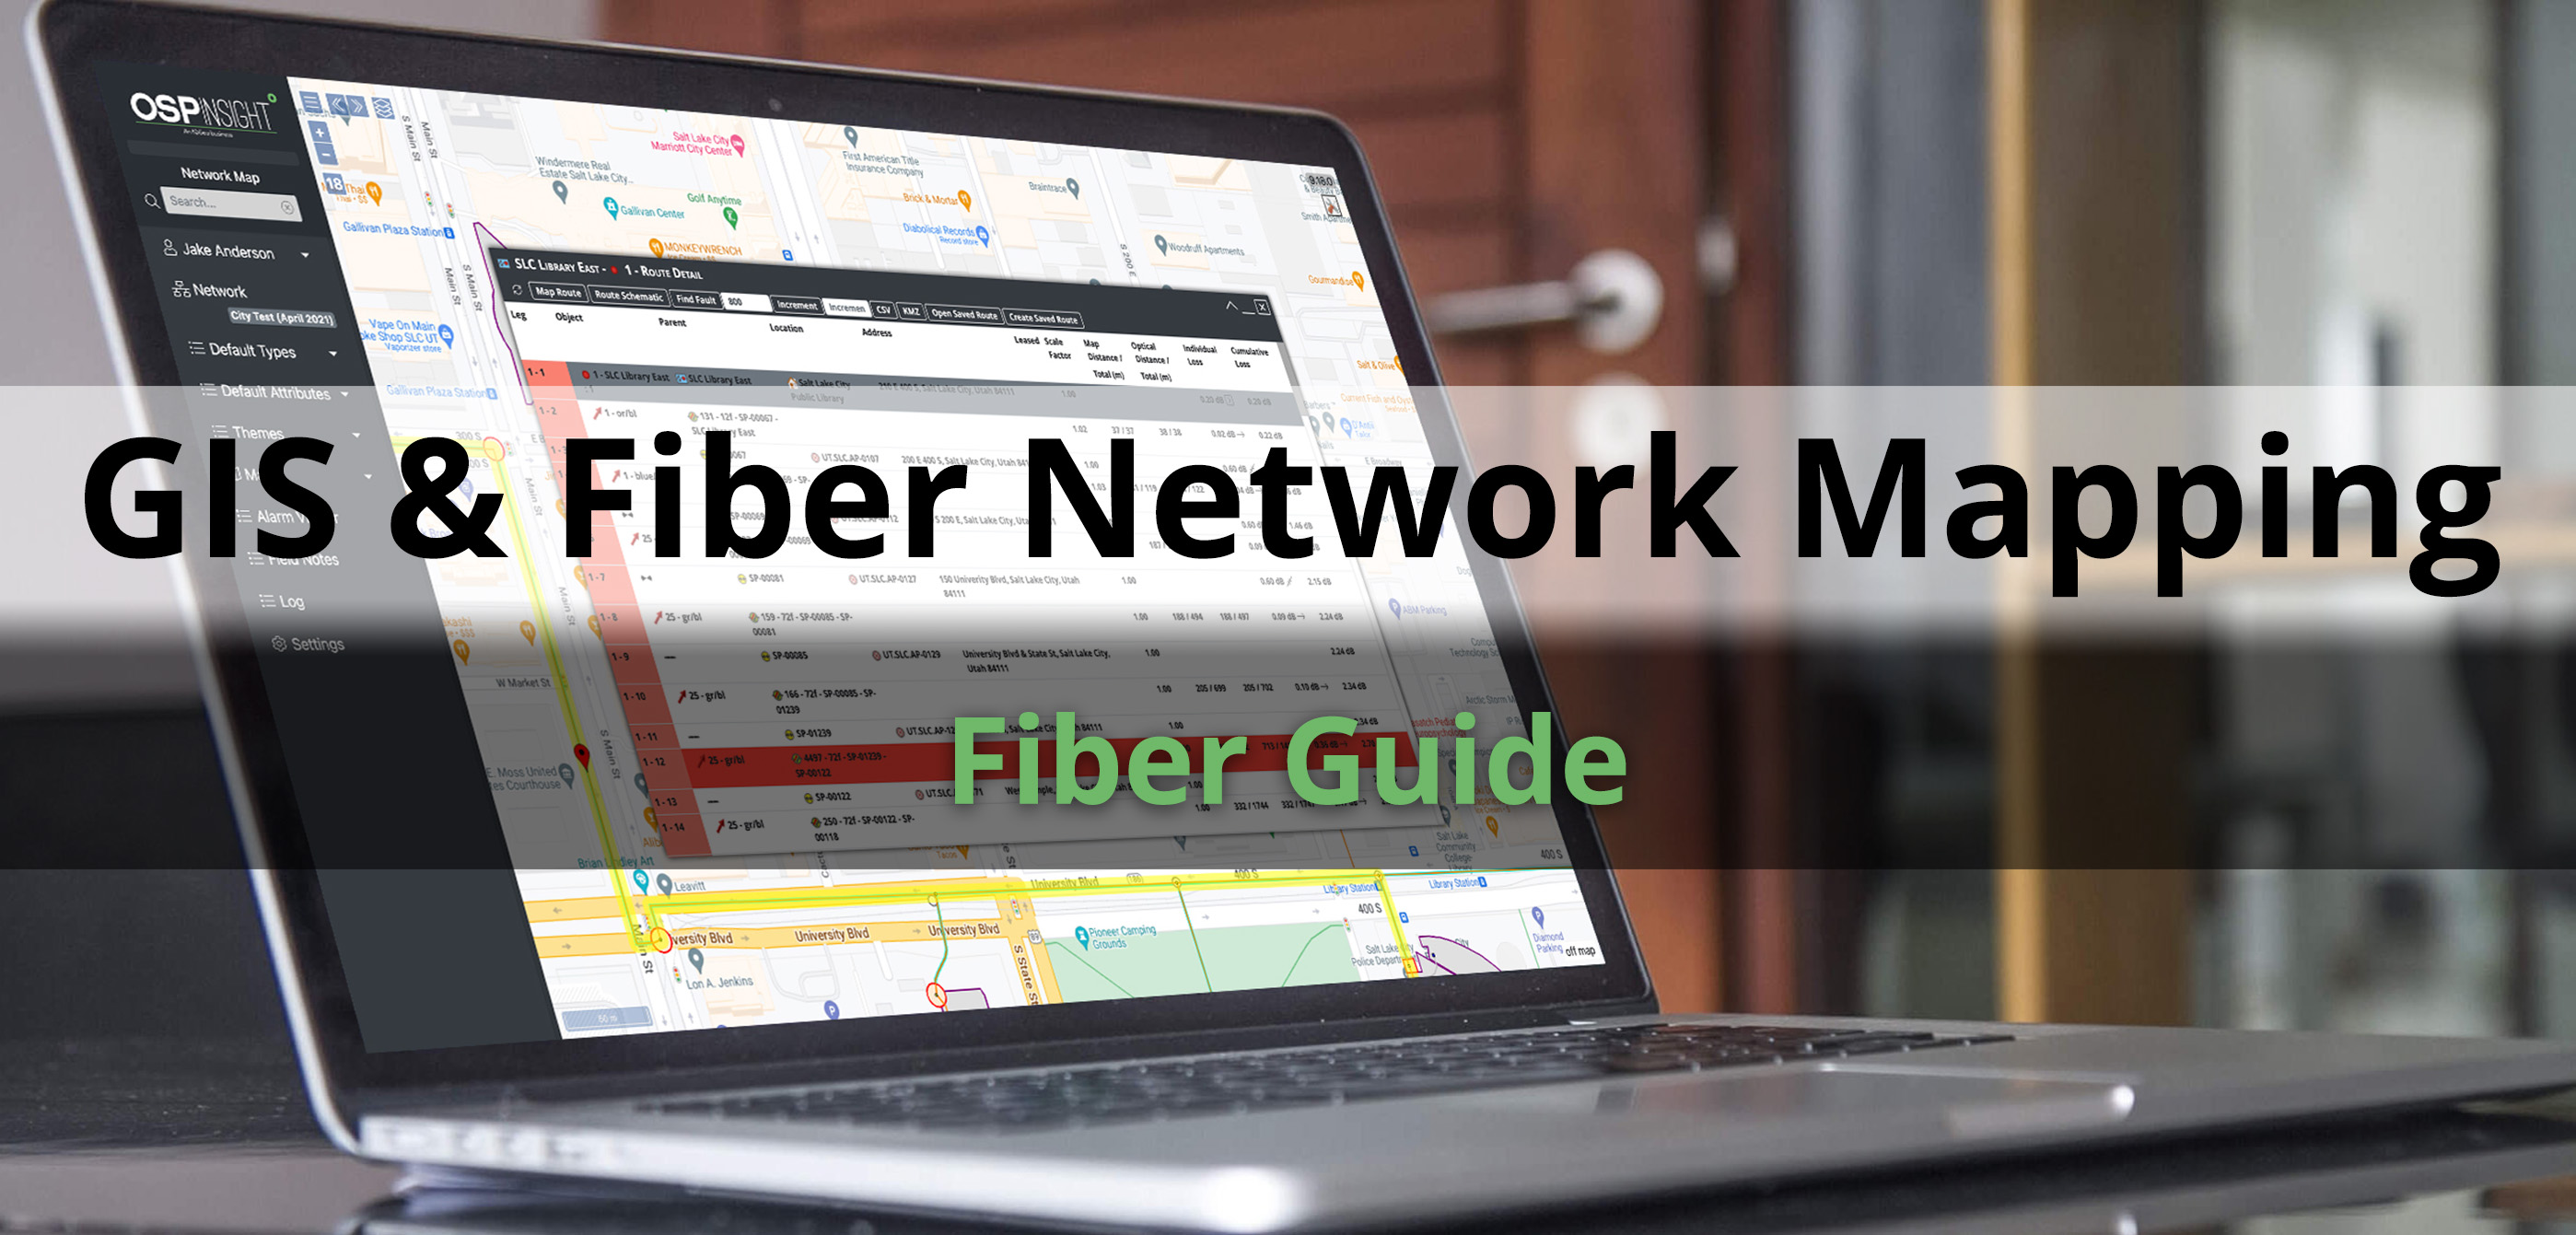 Fiber Guide_GIS & Fiber Network Mapping_Landing page_Featured image-1